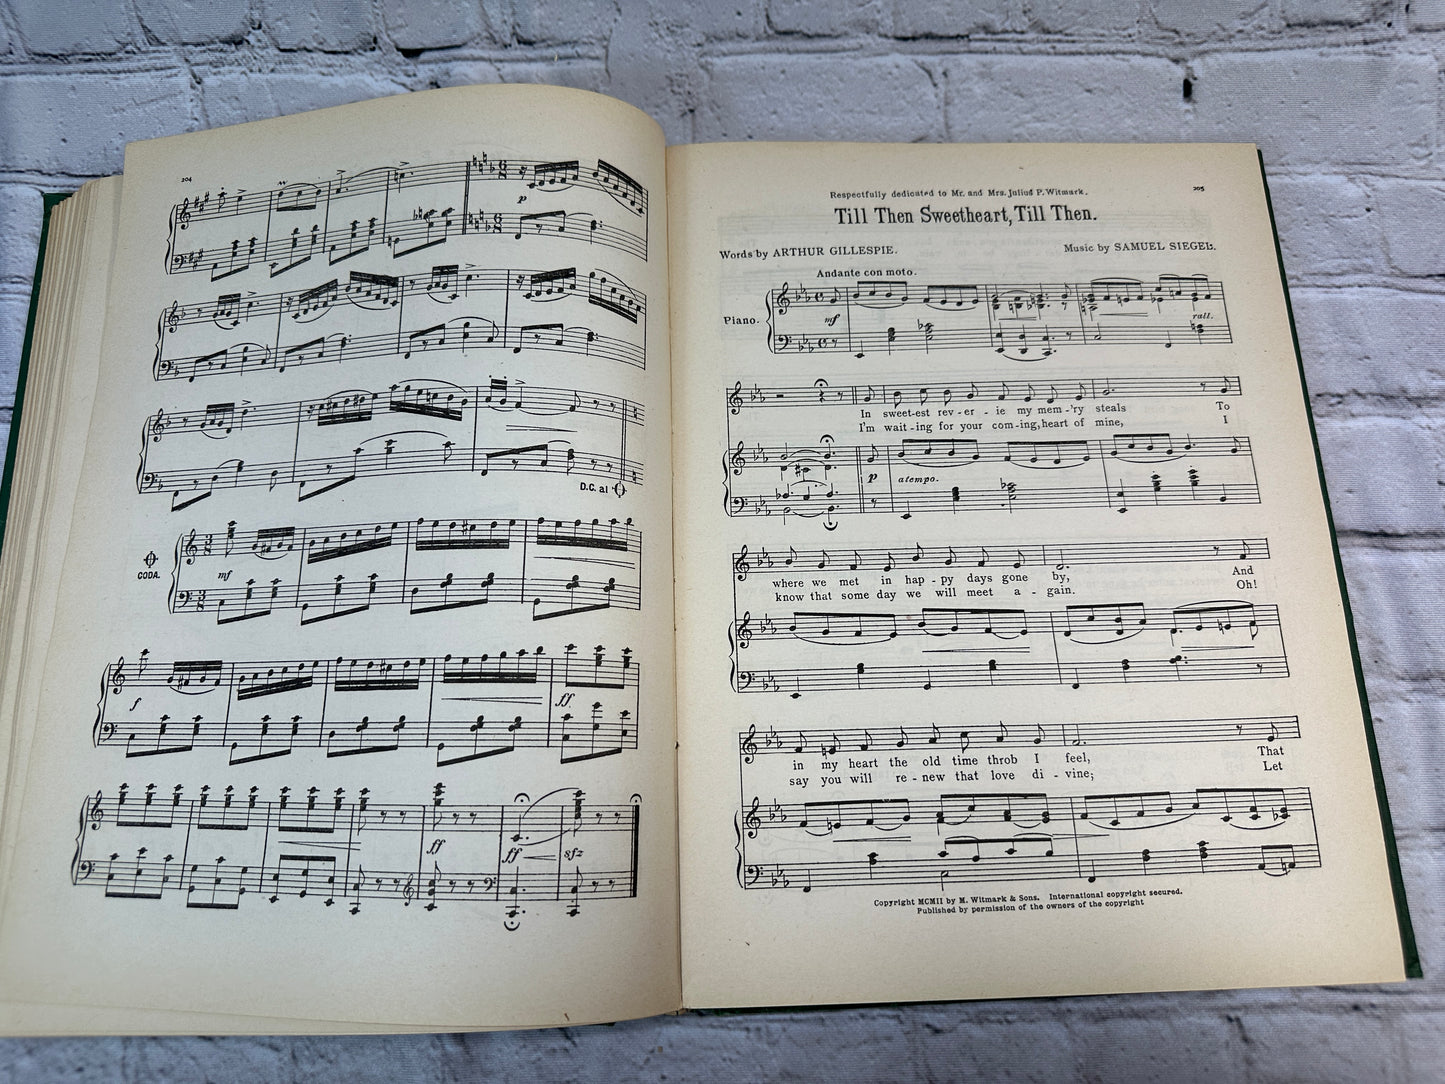 Masterpieces of Melody and the Musical Art edited by Nathaniel Rubinkam [1906]